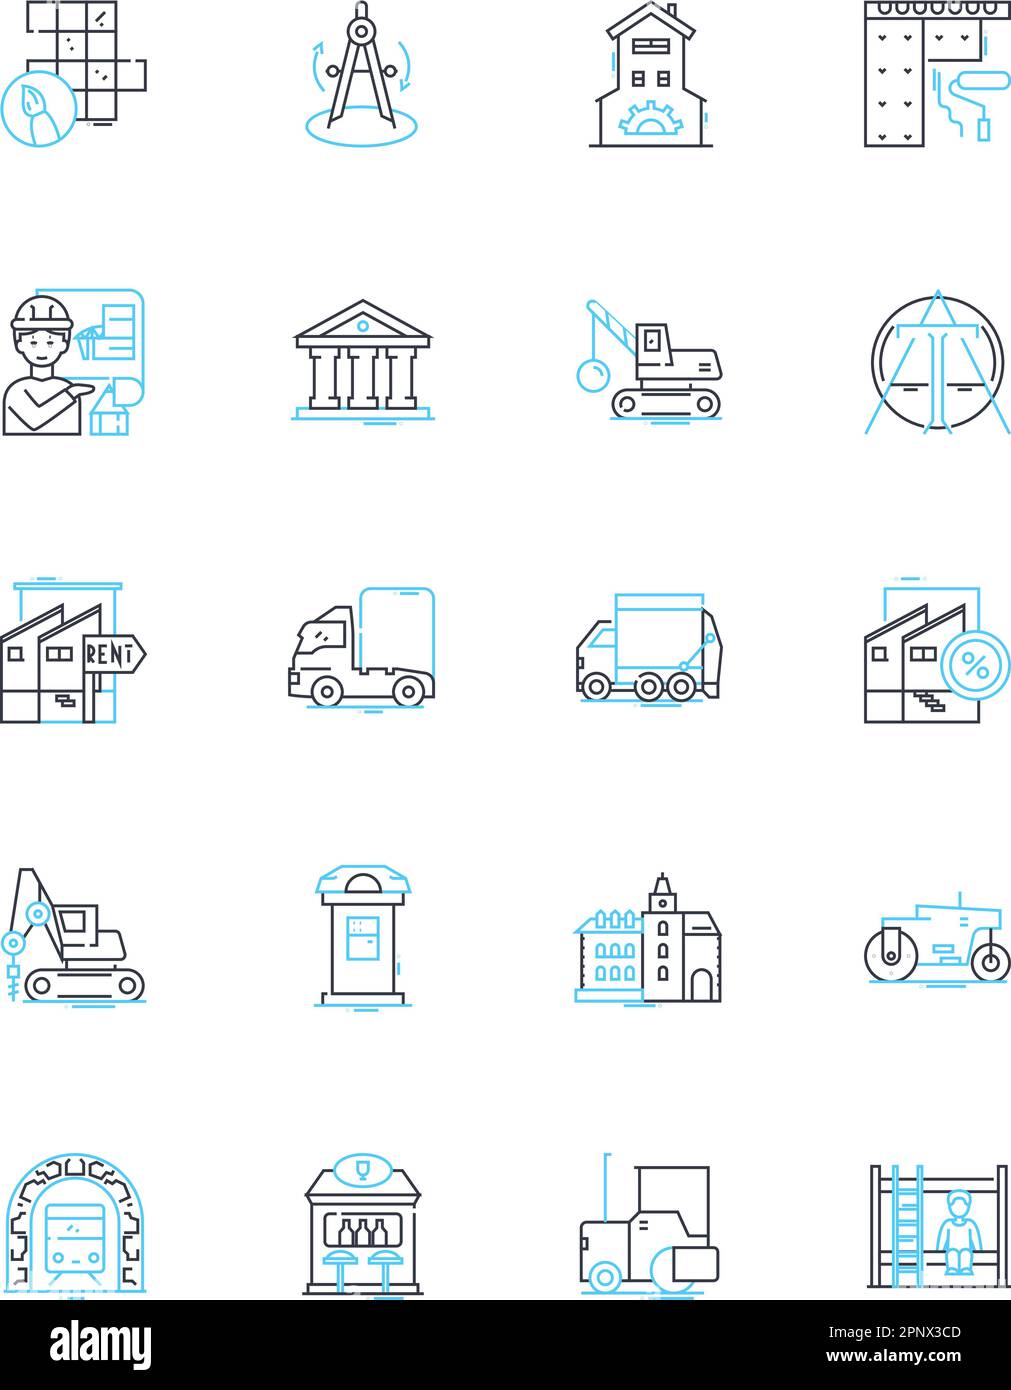 Urban planning linear icons set. Infrastructure, Architecture, Zoning, Transportation, Sustainability, Density, Pedestrianization line vector and Stock Vector